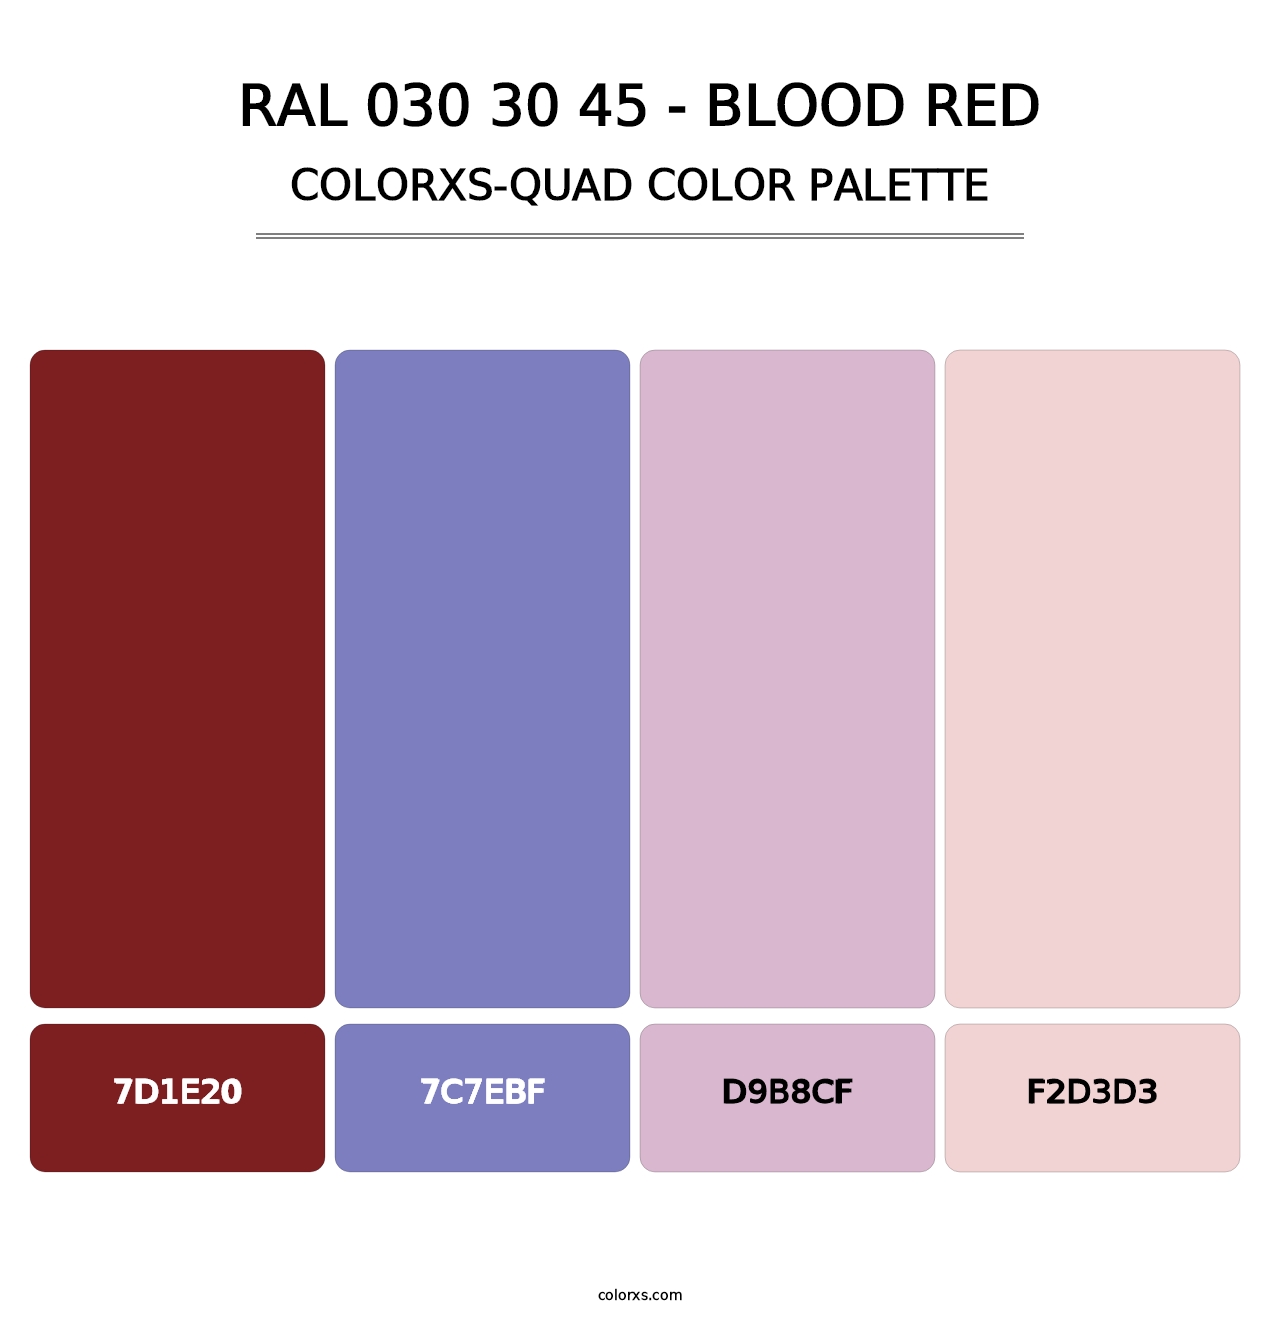 RAL 030 30 45 - Blood Red - Colorxs Quad Palette